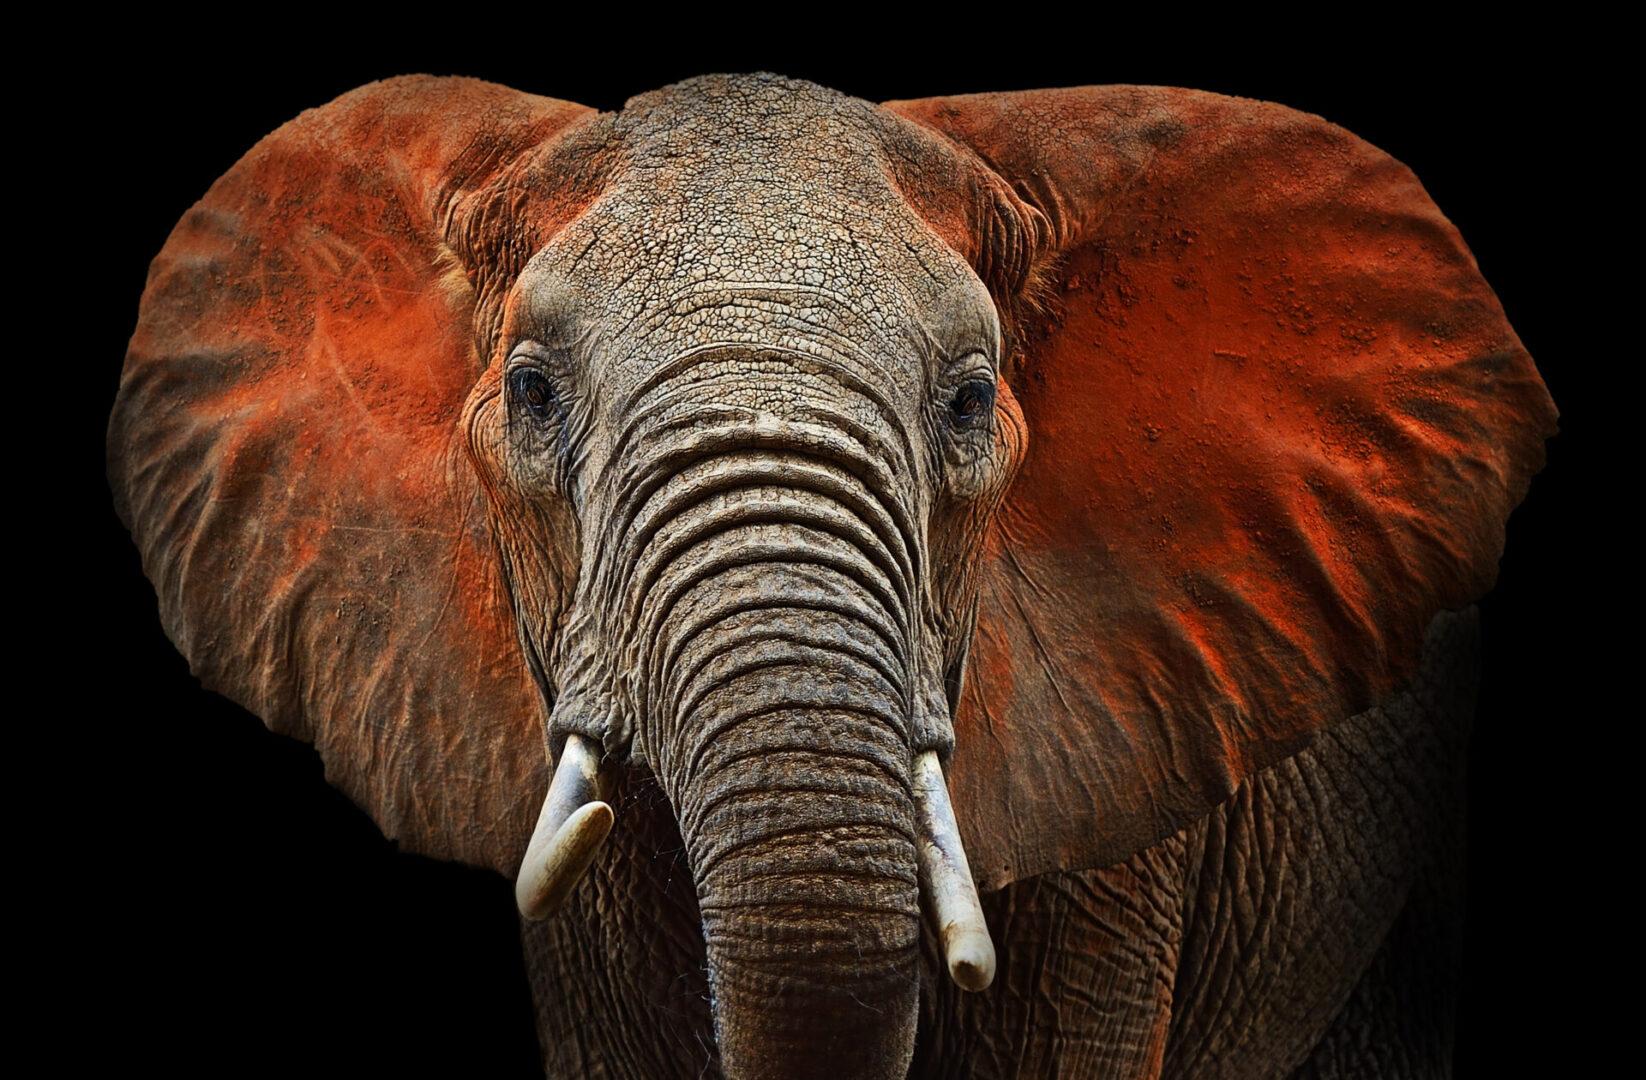 A close up of an elephant with its mouth open